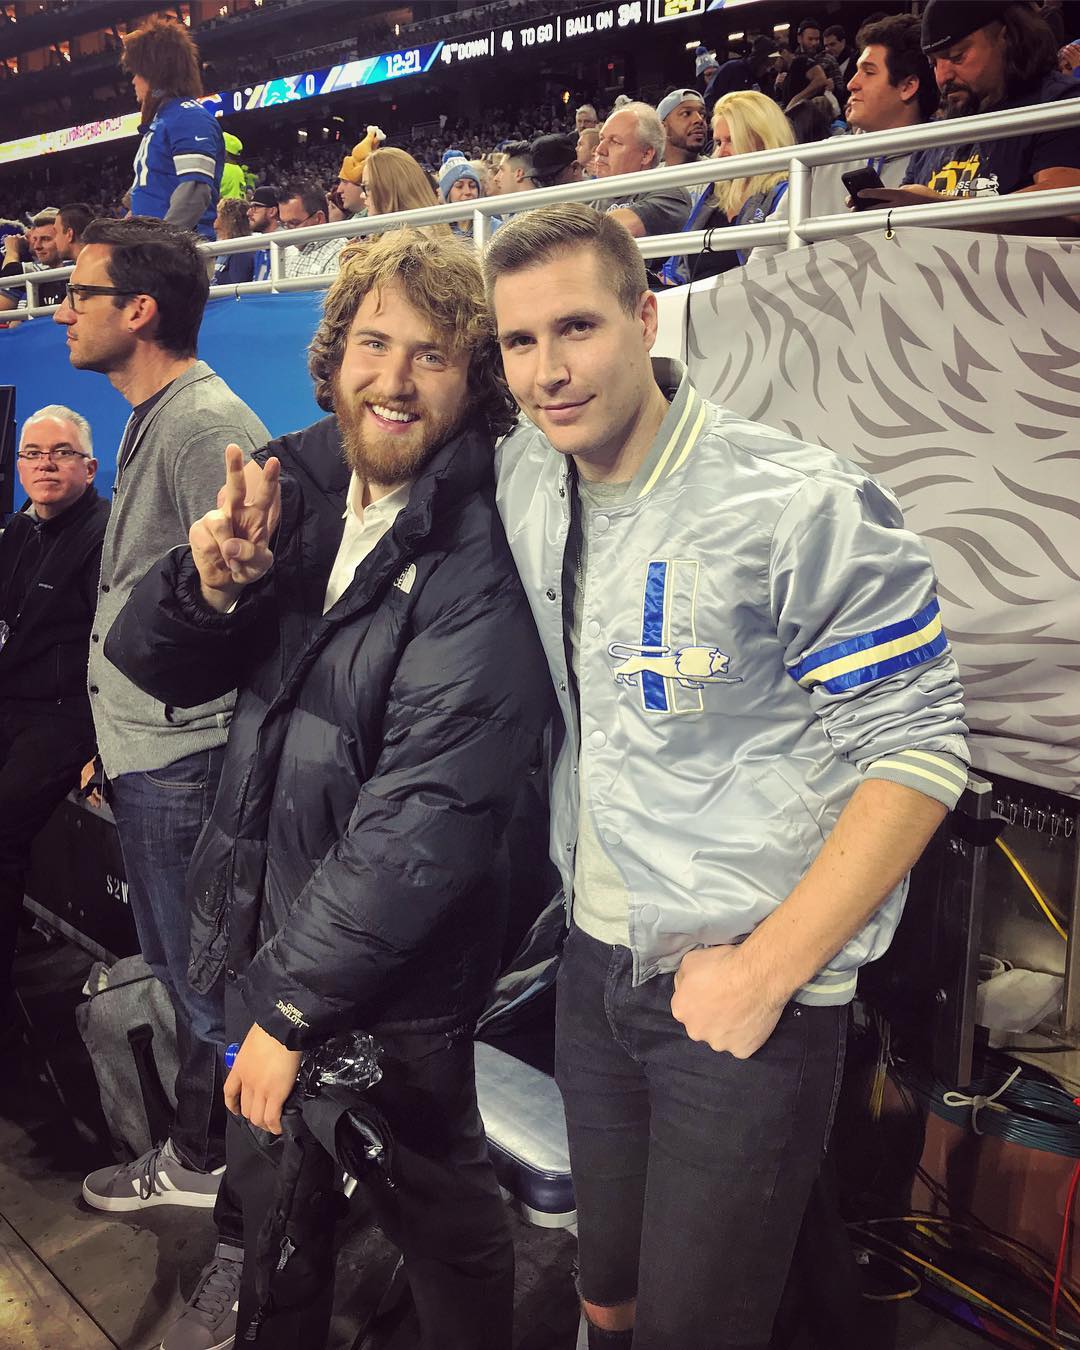 Mike Posner and band member James Bowen at Ford Field before performing the halftime show
Photo credit: James Bowen
